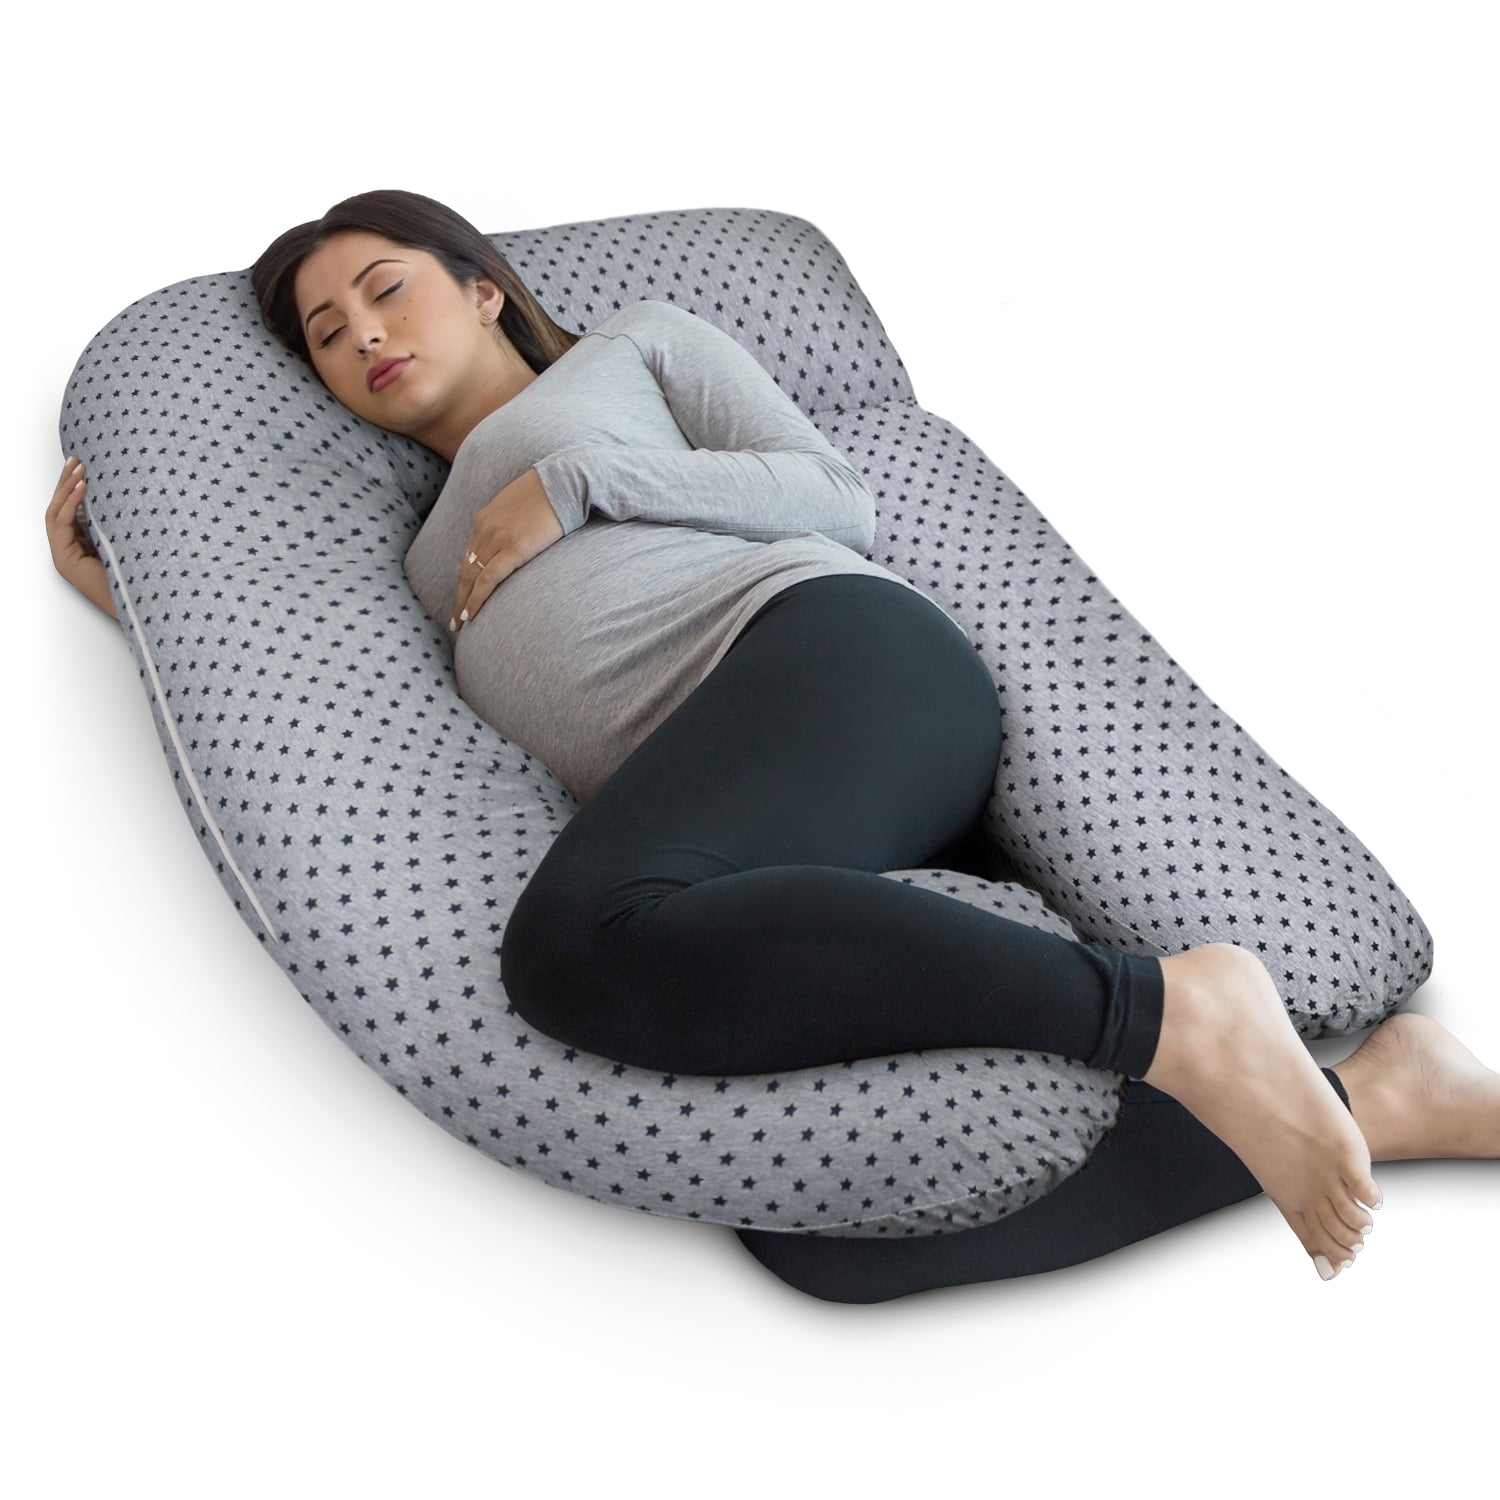 Giant 12FT U Shaped Pillow Extra Filled Pregnancy Maternity Body Back Support JO 